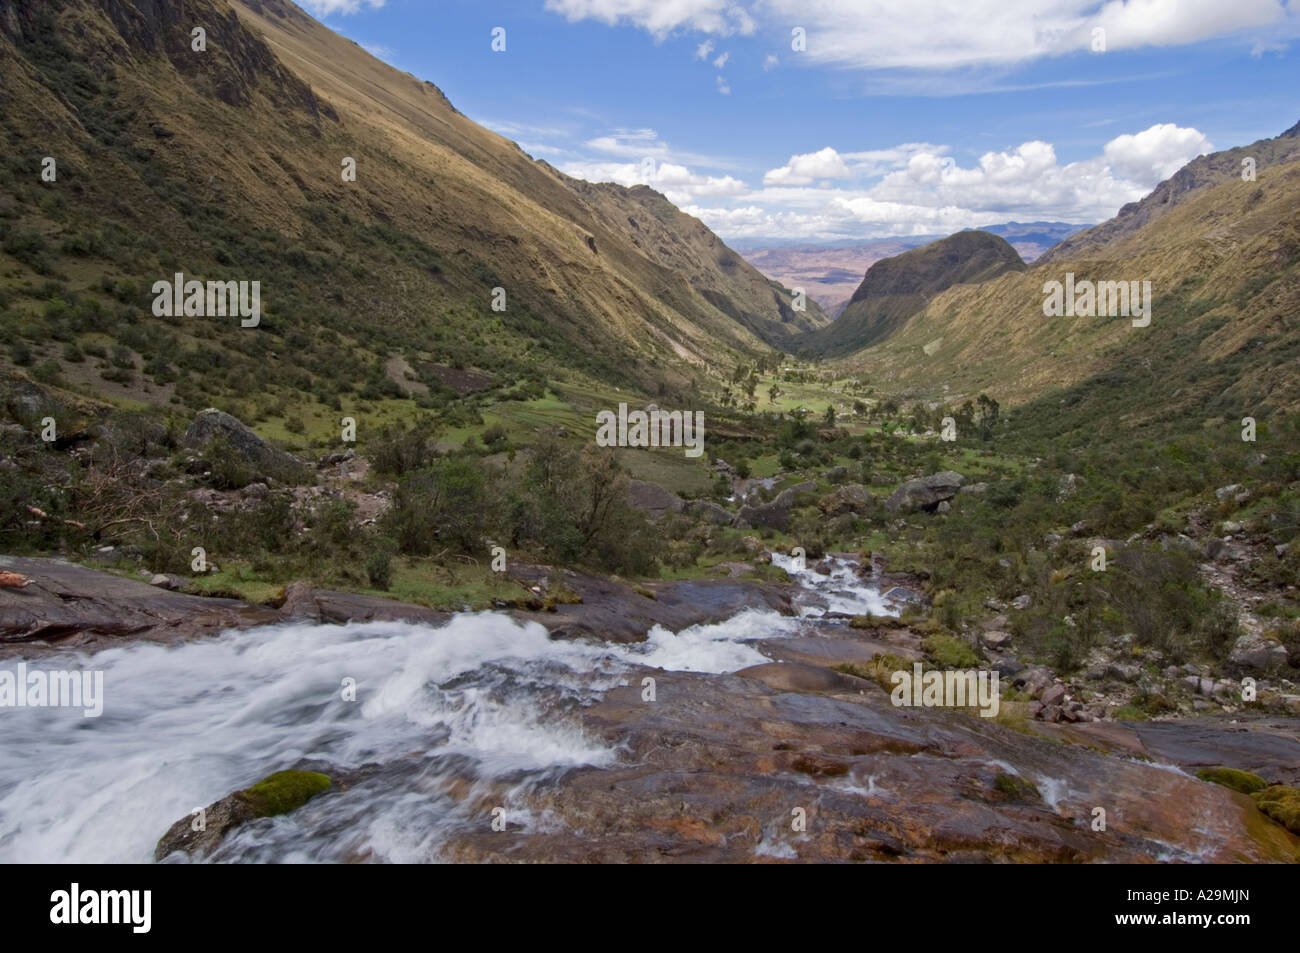 A waterfall and rugged mountain scenery while on the 'community' Inca trail with a slow shutter speed to blur the motion. Stock Photo